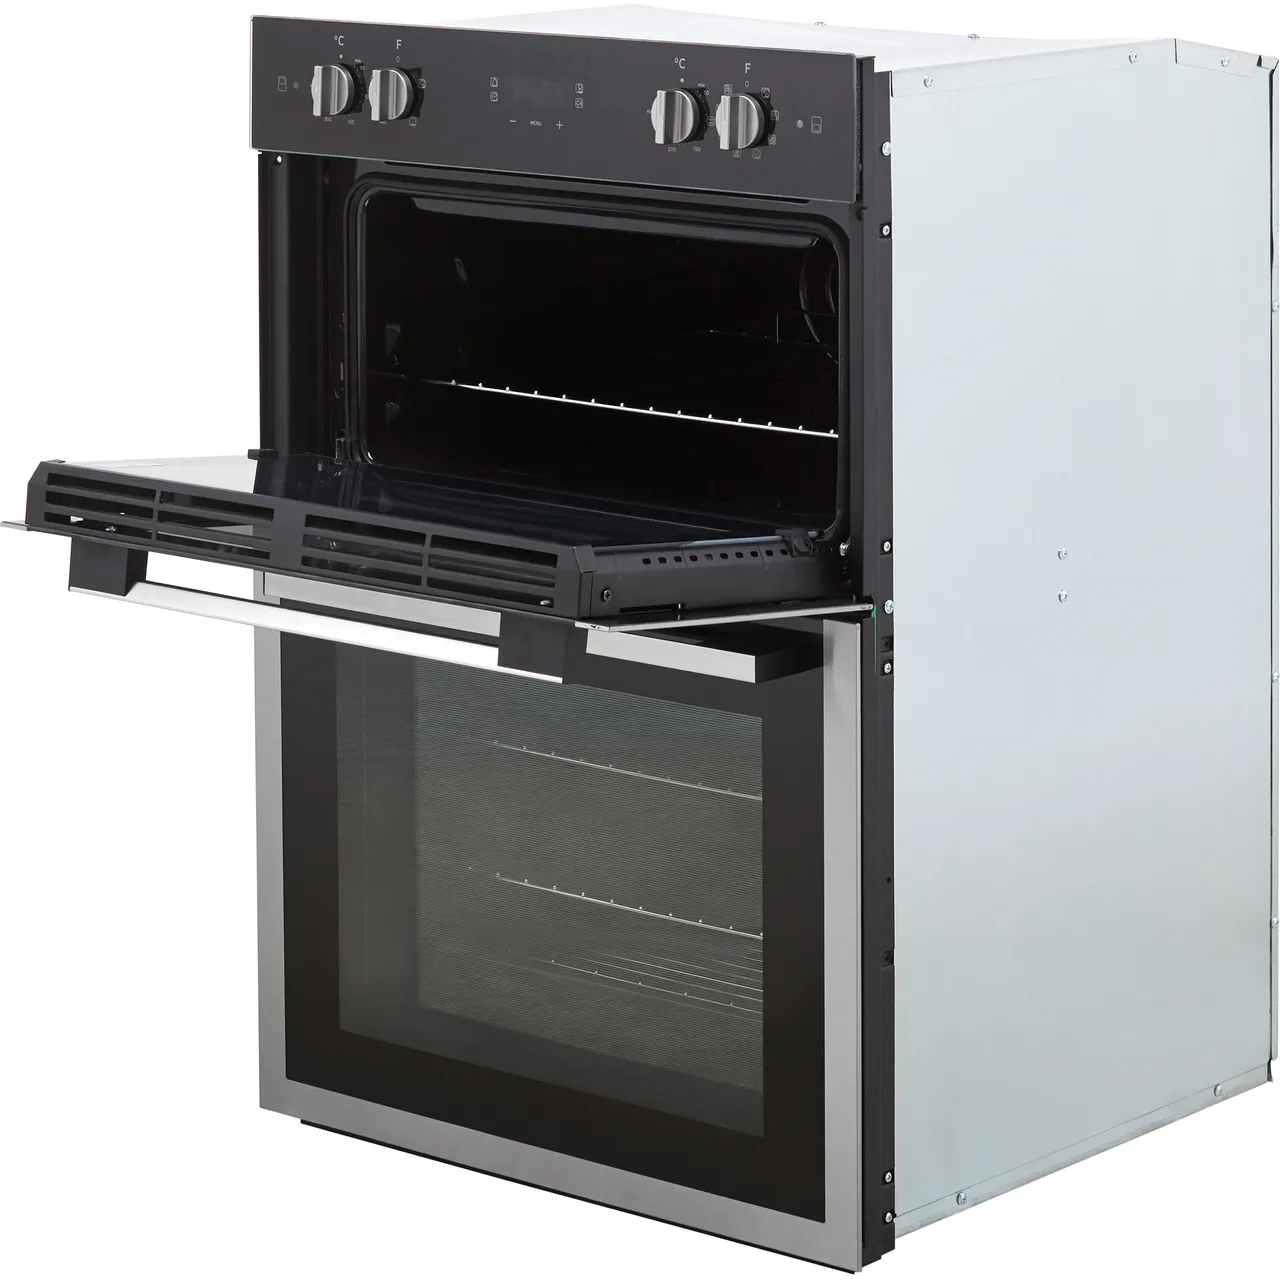 Hoover Double Oven Stainless Steel Built In Electric  65L/42L Black-HO9DC3UB308BI 8424B